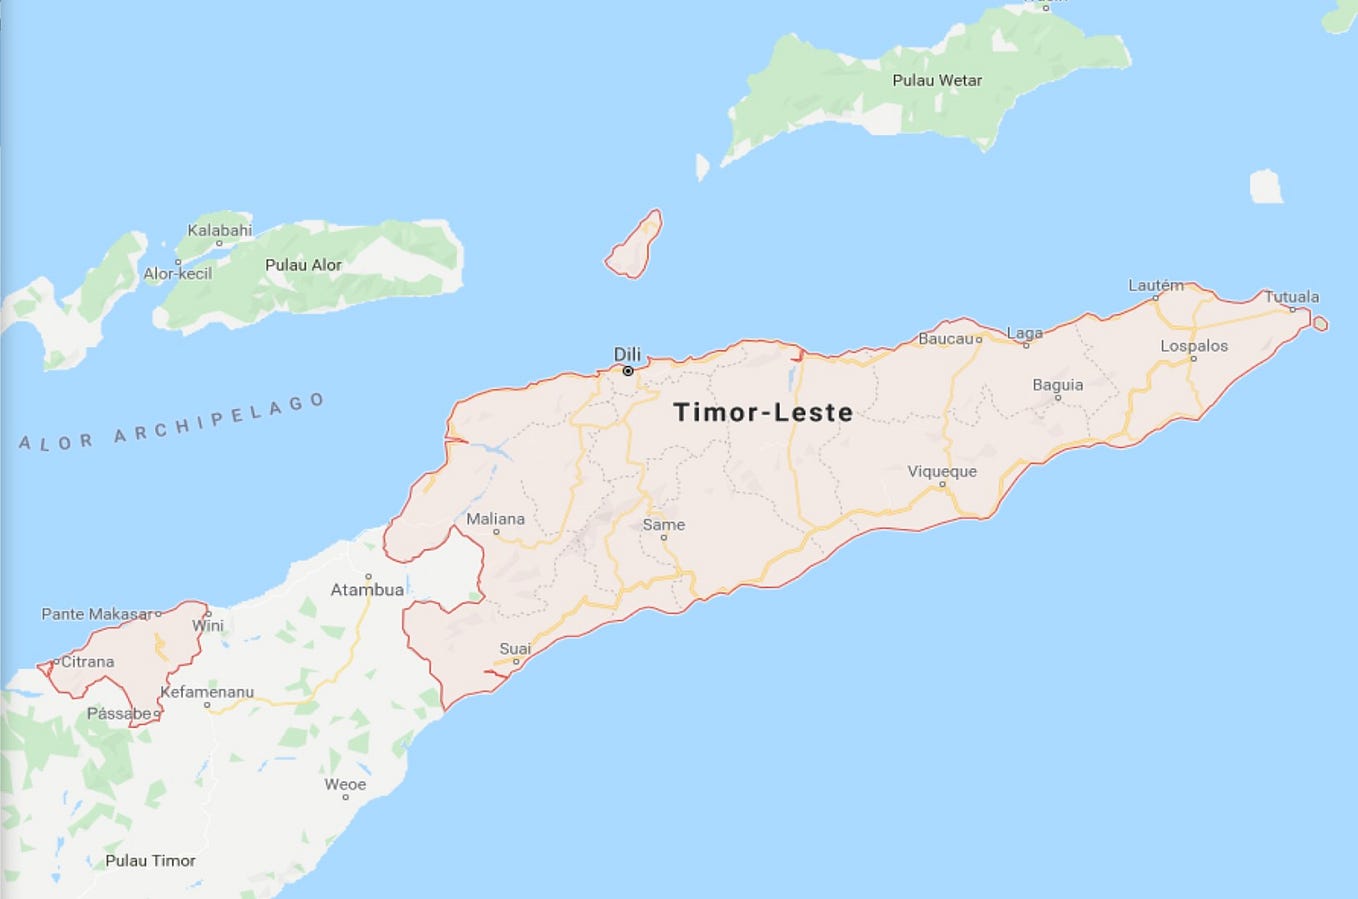 Completion of My Visit to the 13 Municipalities of Timor-Leste (Part 1)